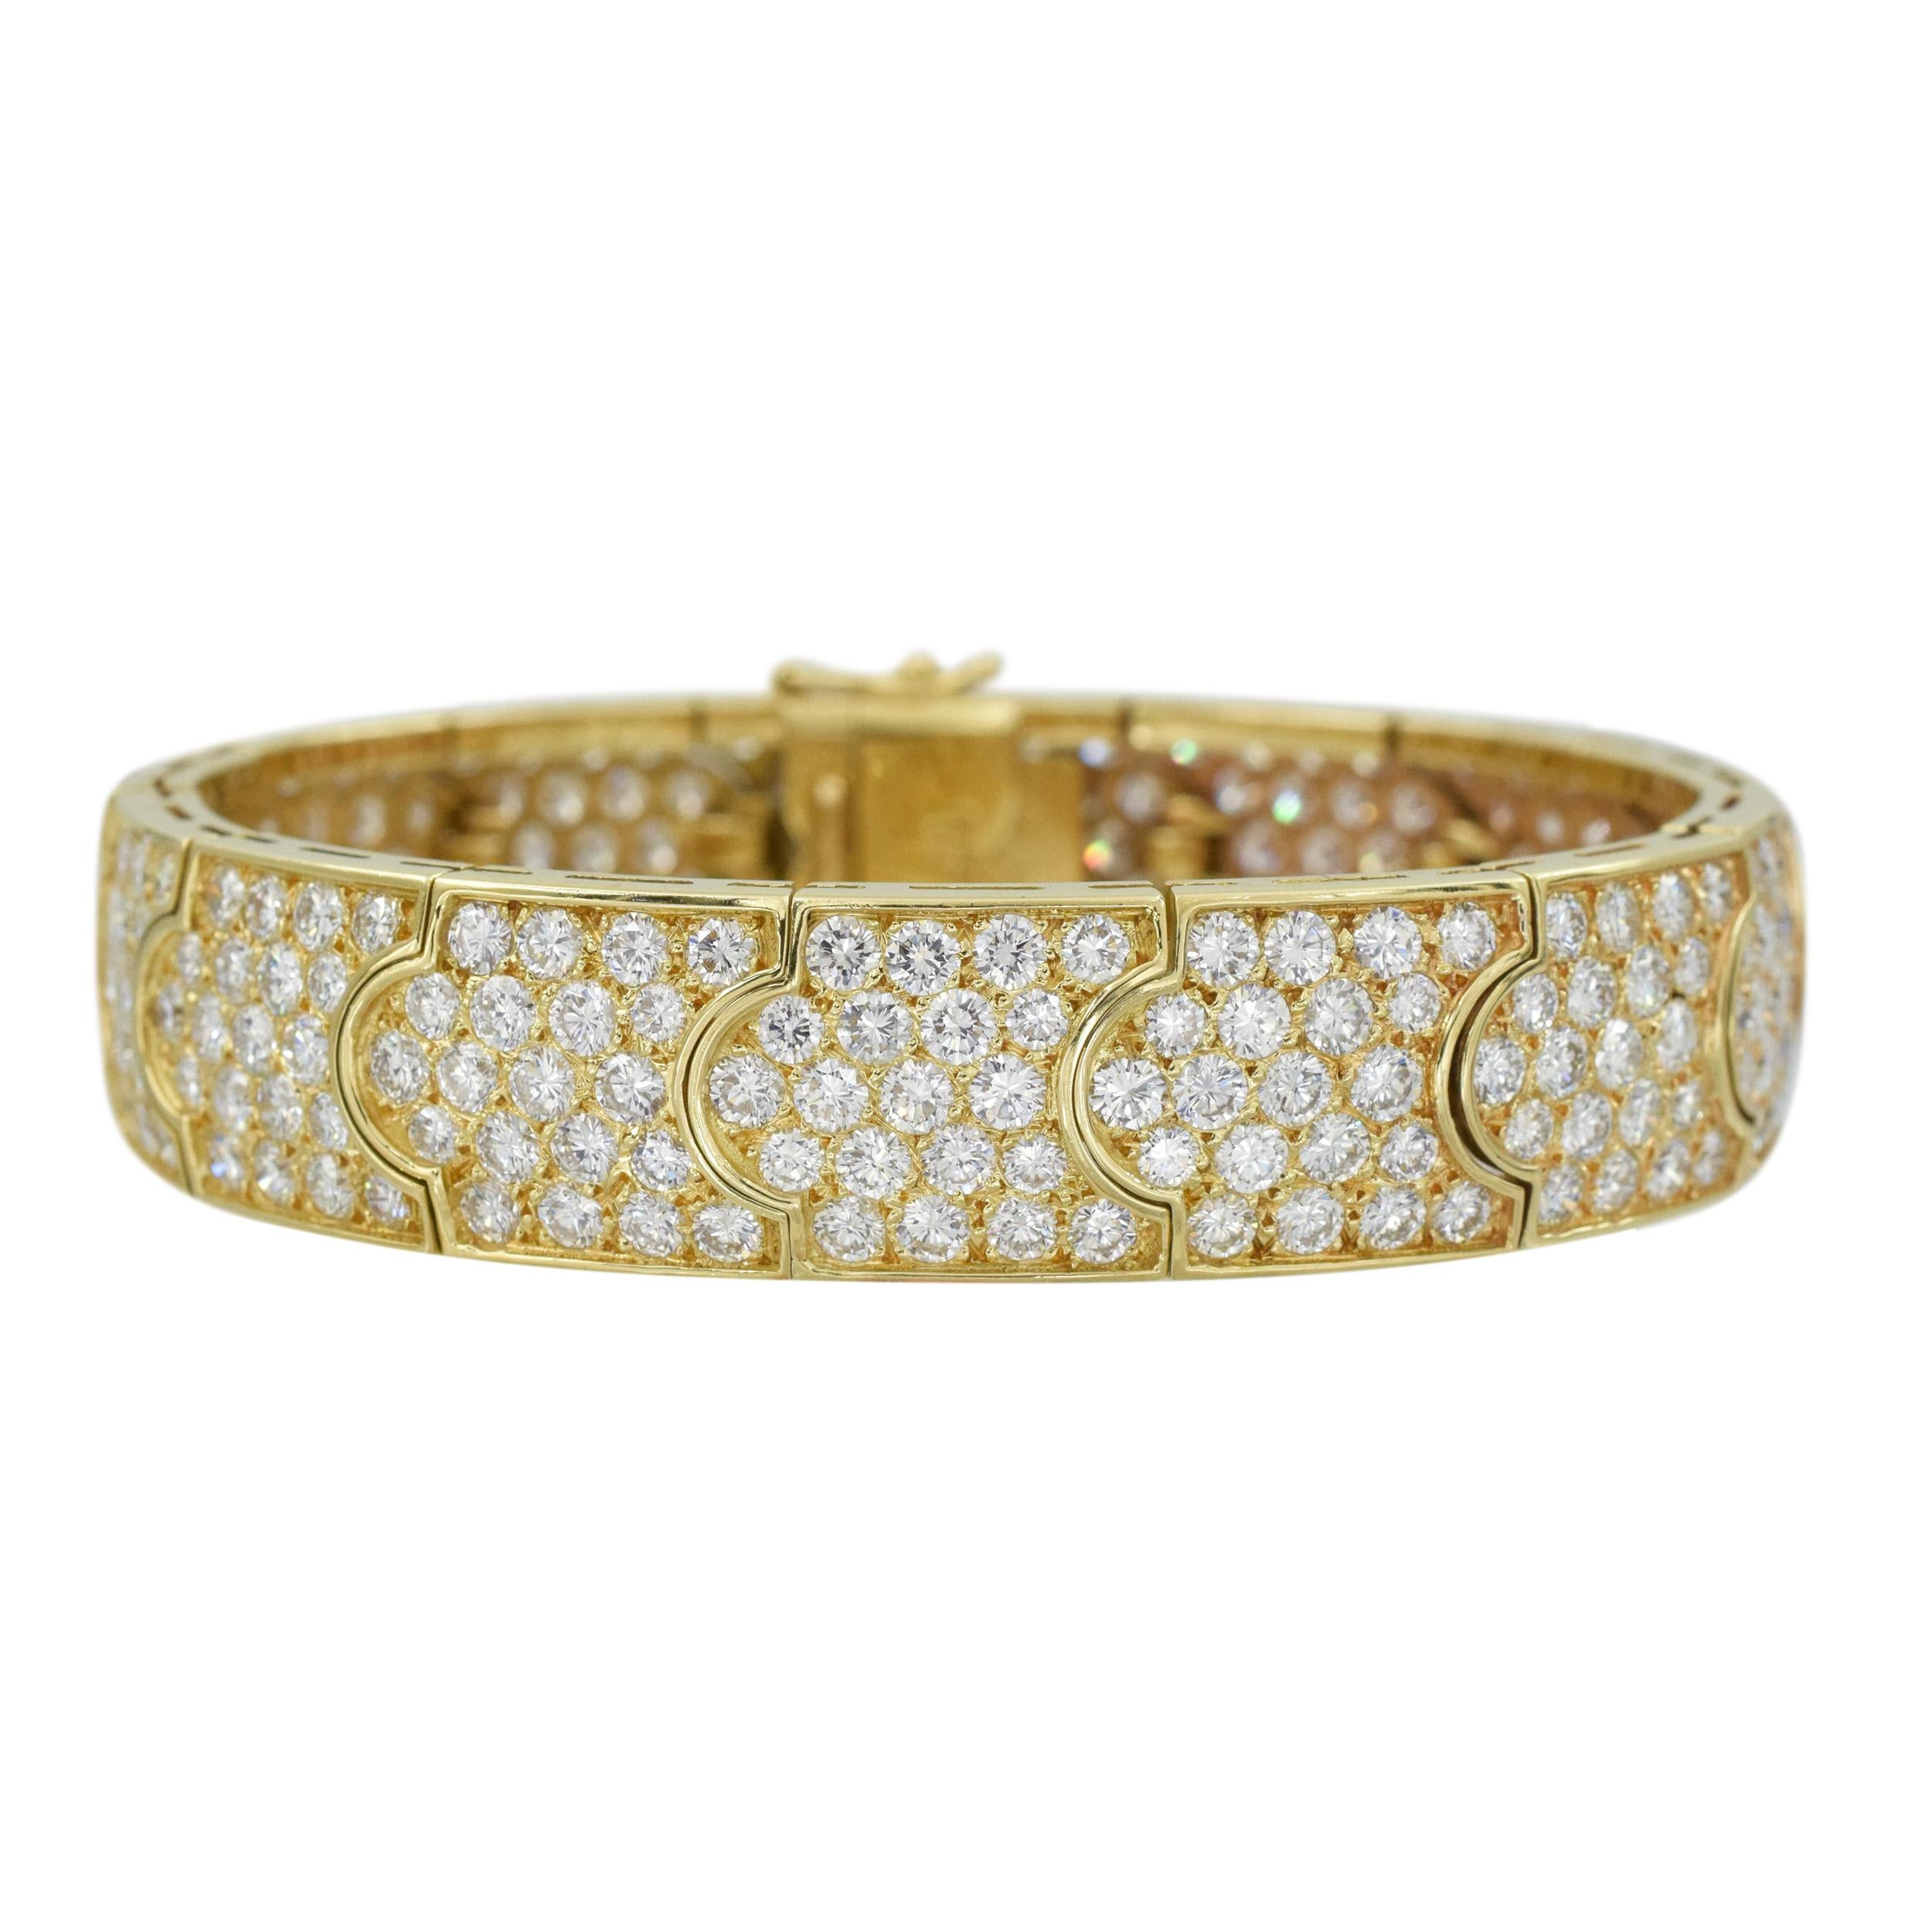 Impressive Gold and Diamond Bracelet This bangle bracelets has 290
diamonds (Color: G/H, Clarity: VS) weight
approximately 22.65 carat  all set in 18k yellow gold.
 Length 7 inches,
 Width: 9/16 inches;


